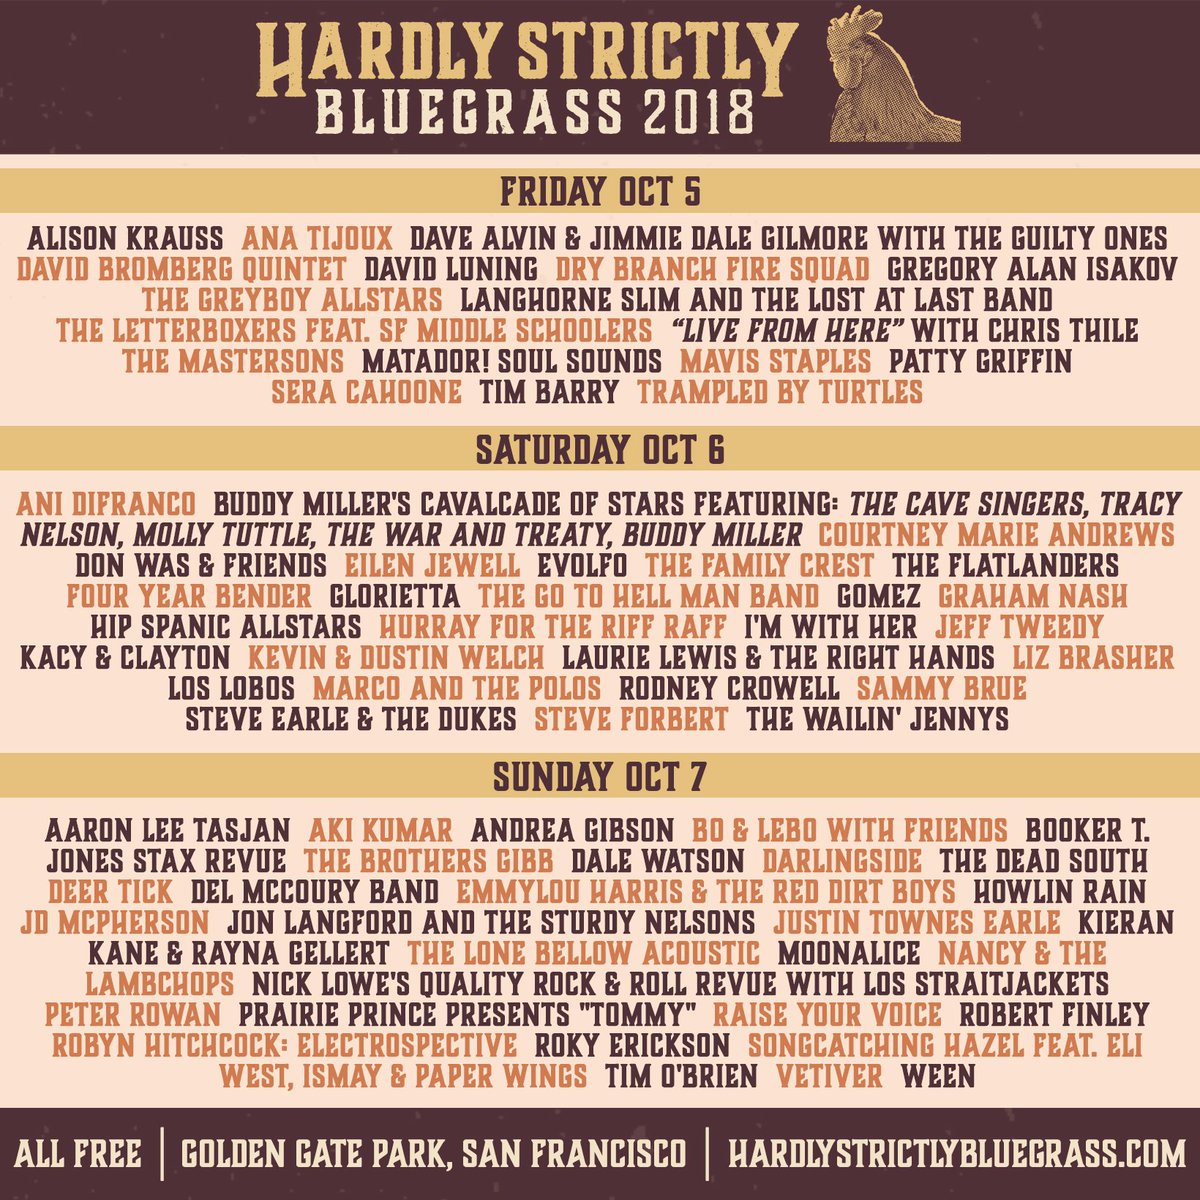 Hardly Strictly Bluegrass 18 Lineup